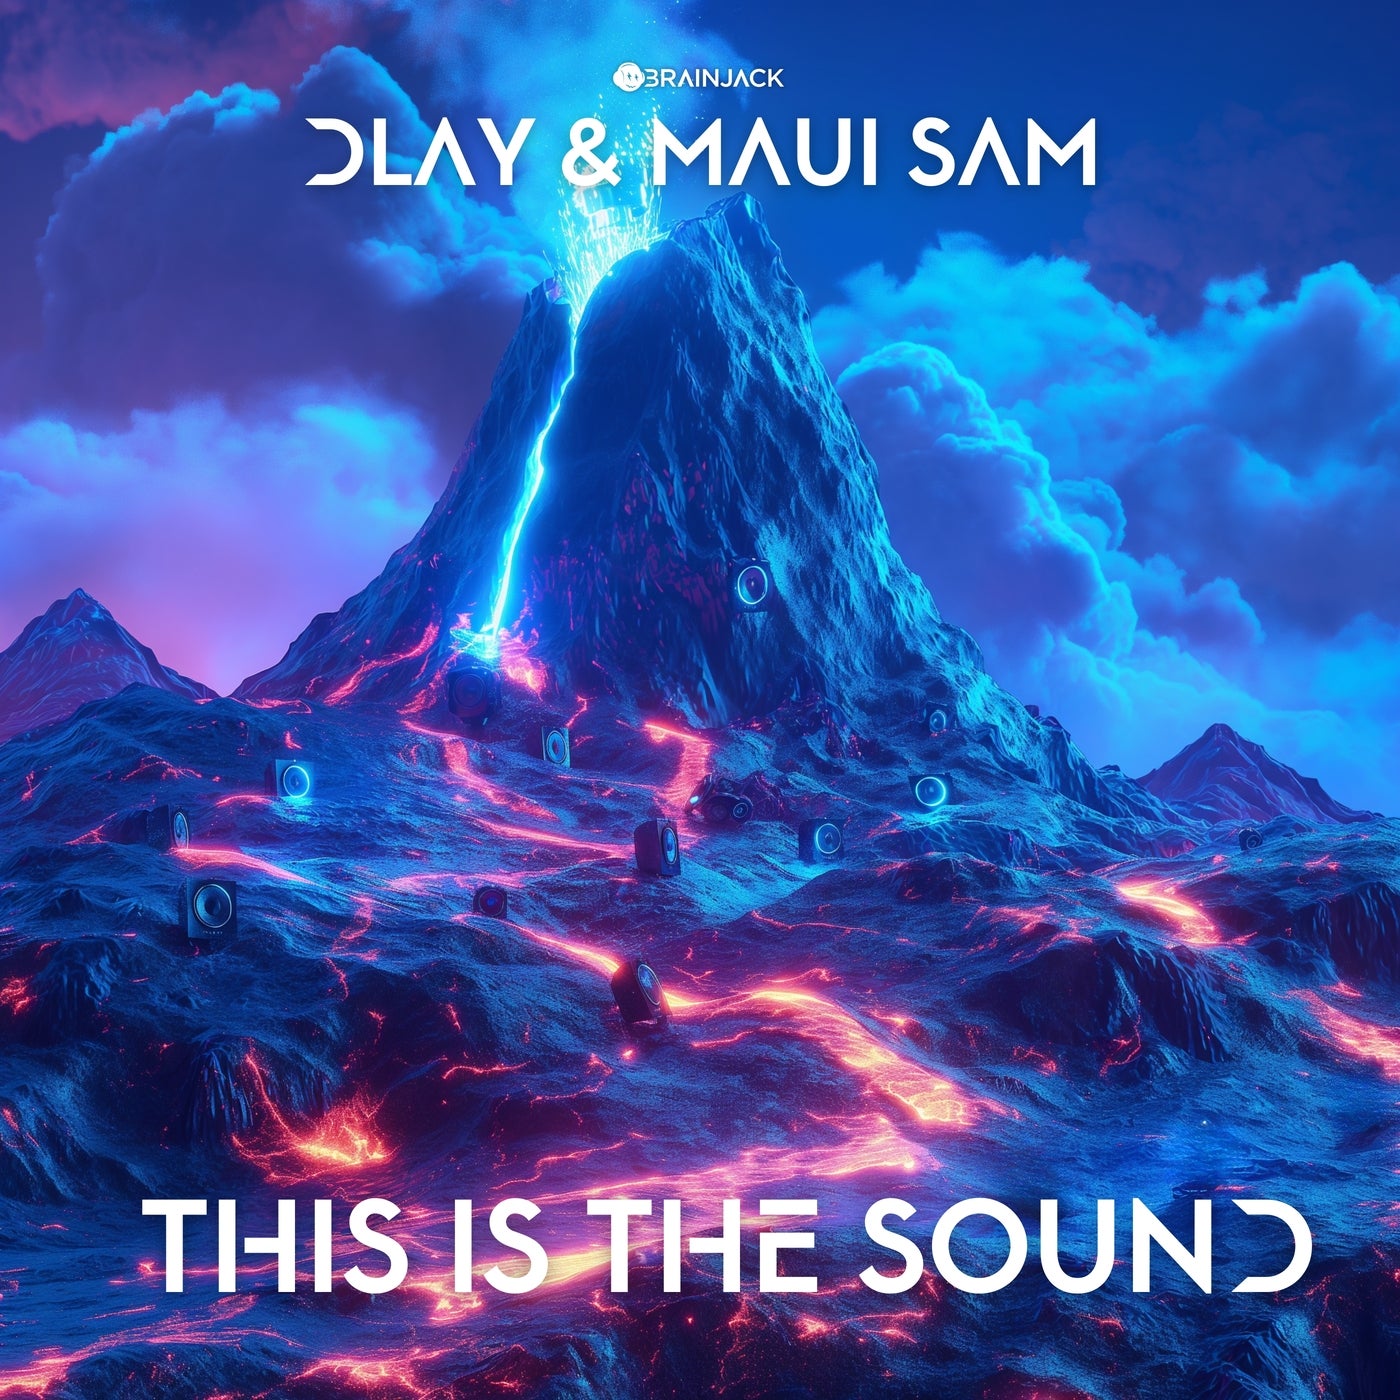 This Is The Sound